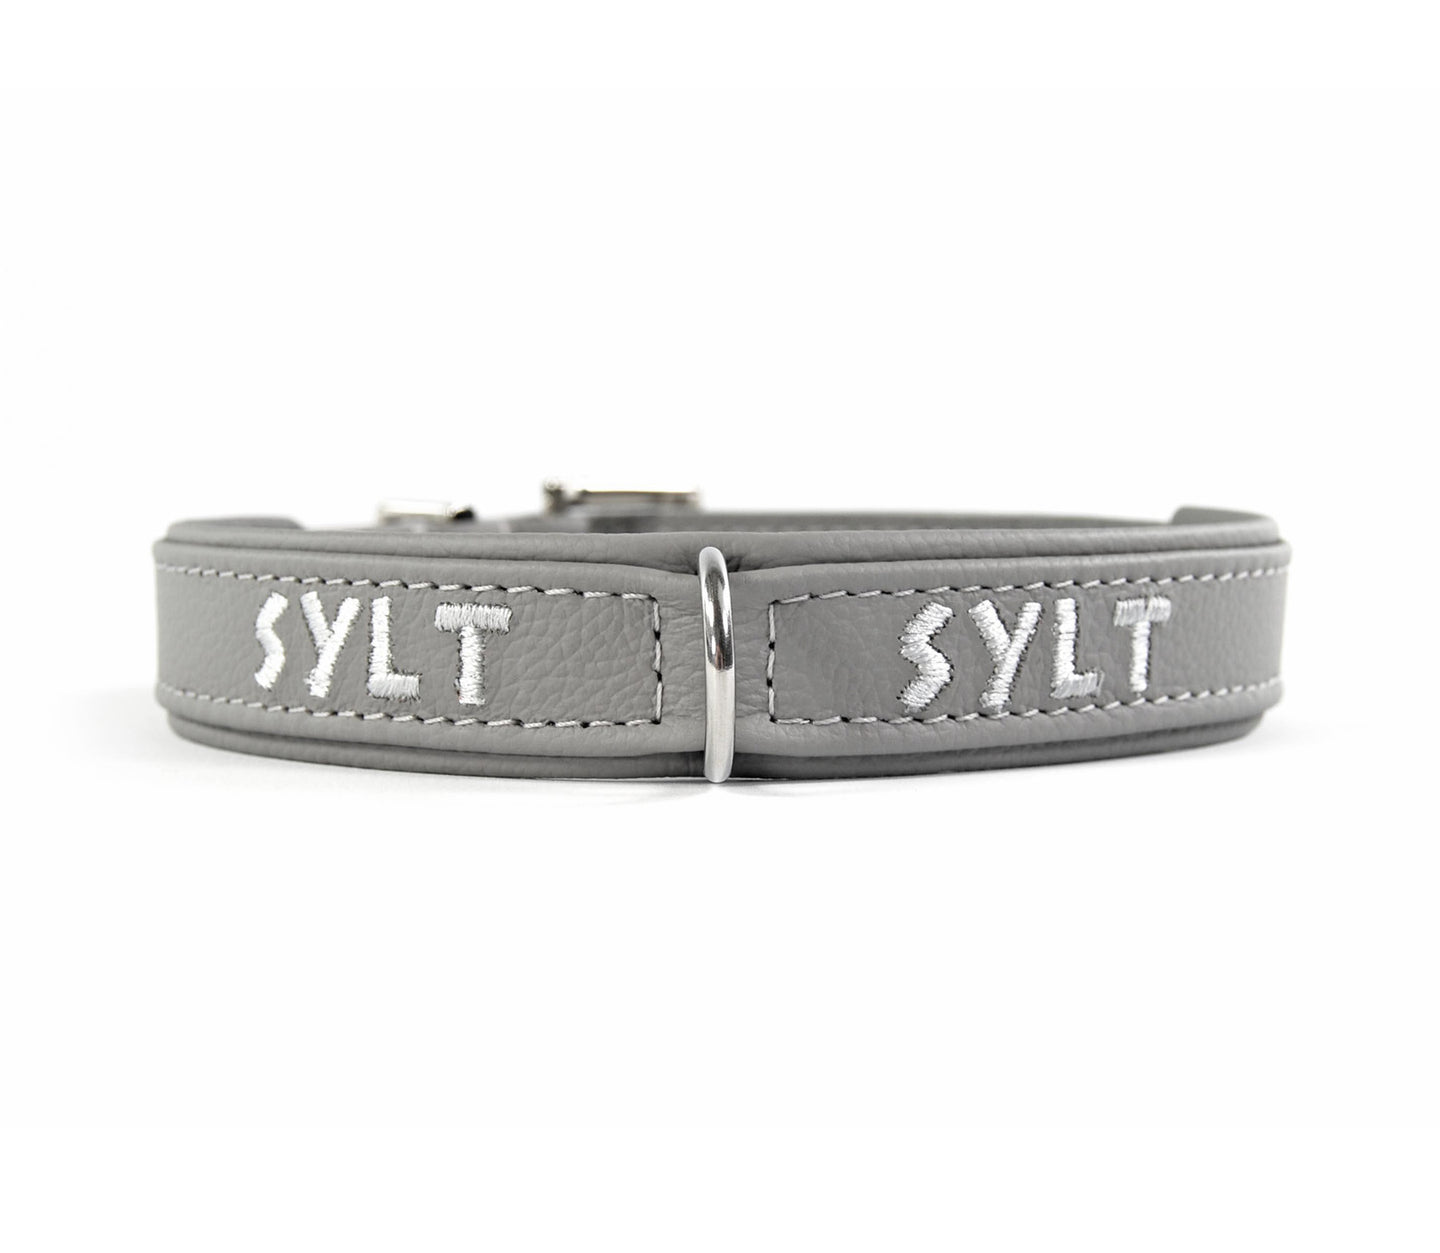 KvK Handcrafted - Collar Classic Curved Sylt Edition